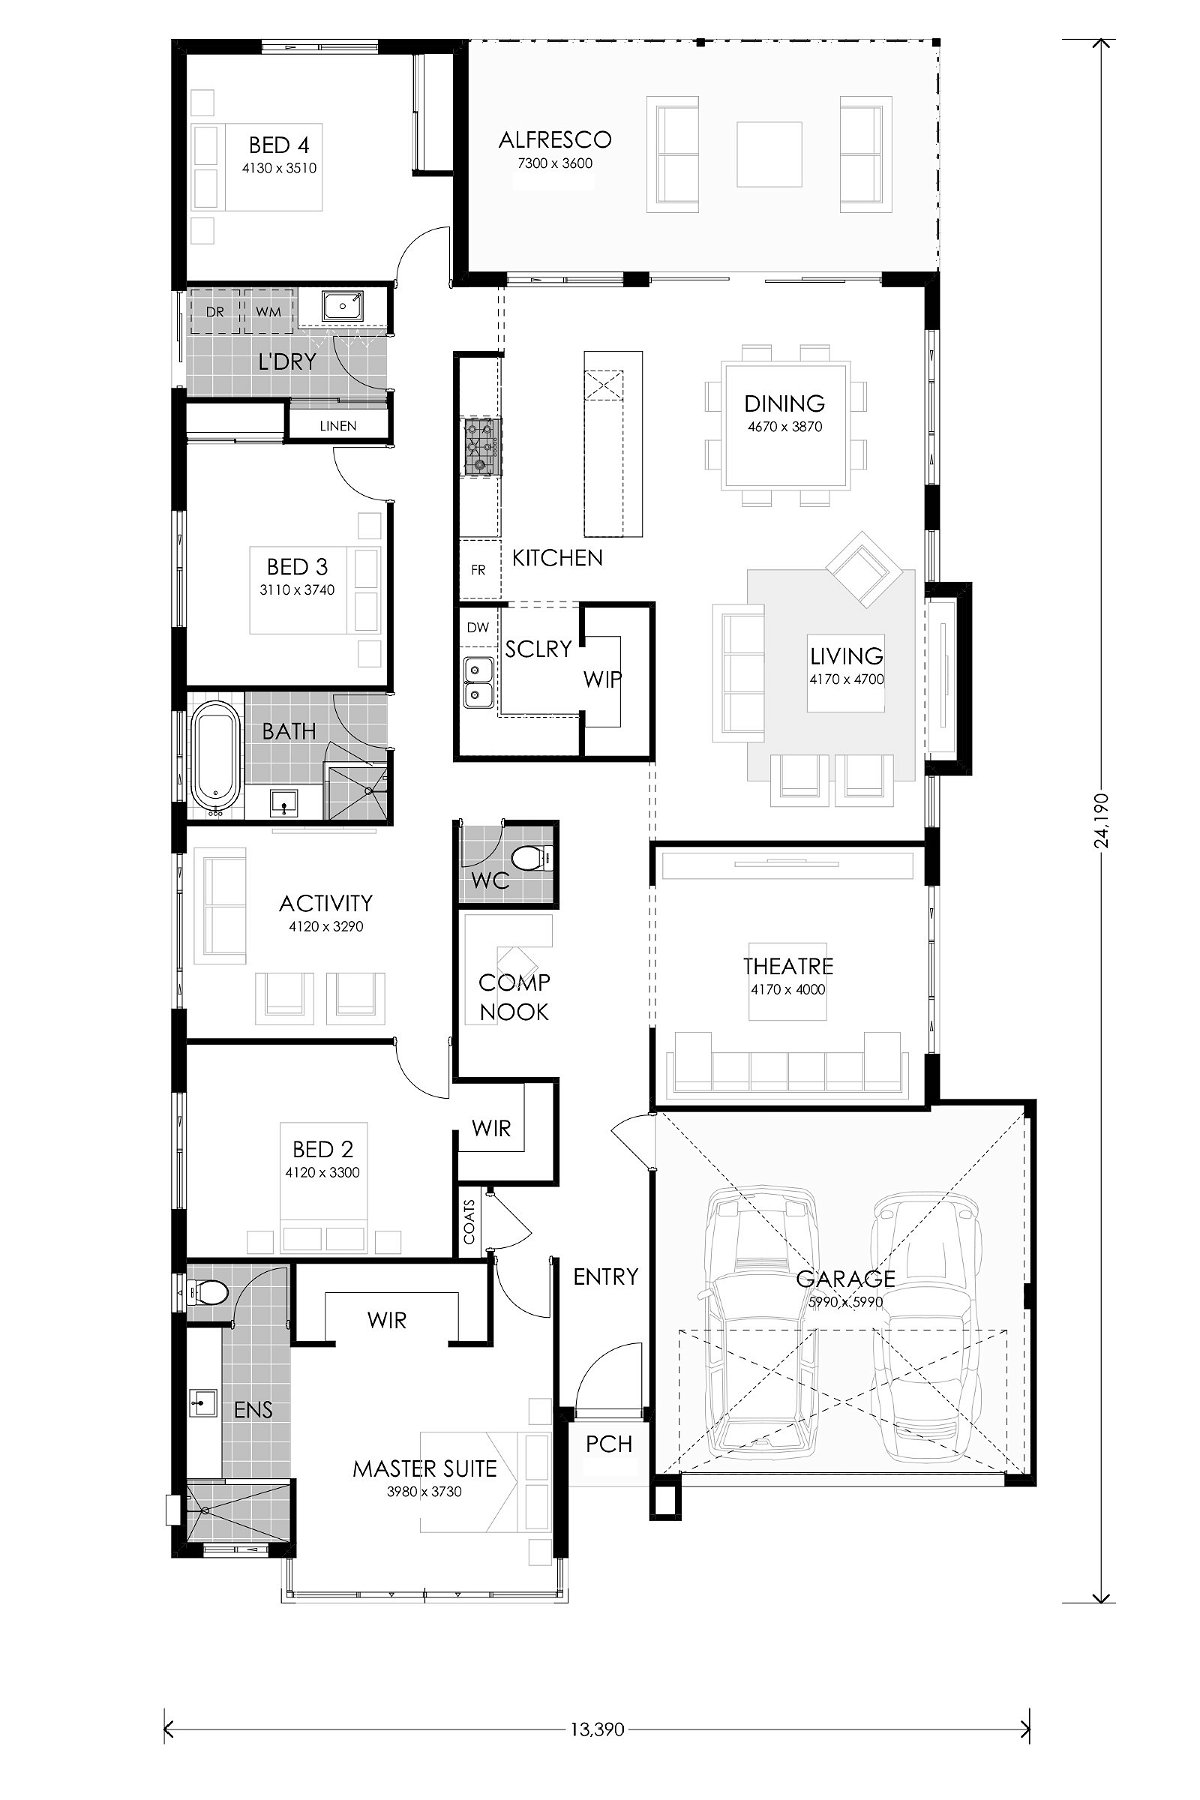 Residential Attitudes - Social Butterfly - Floorplan - Social Butterfly Floorplan Website